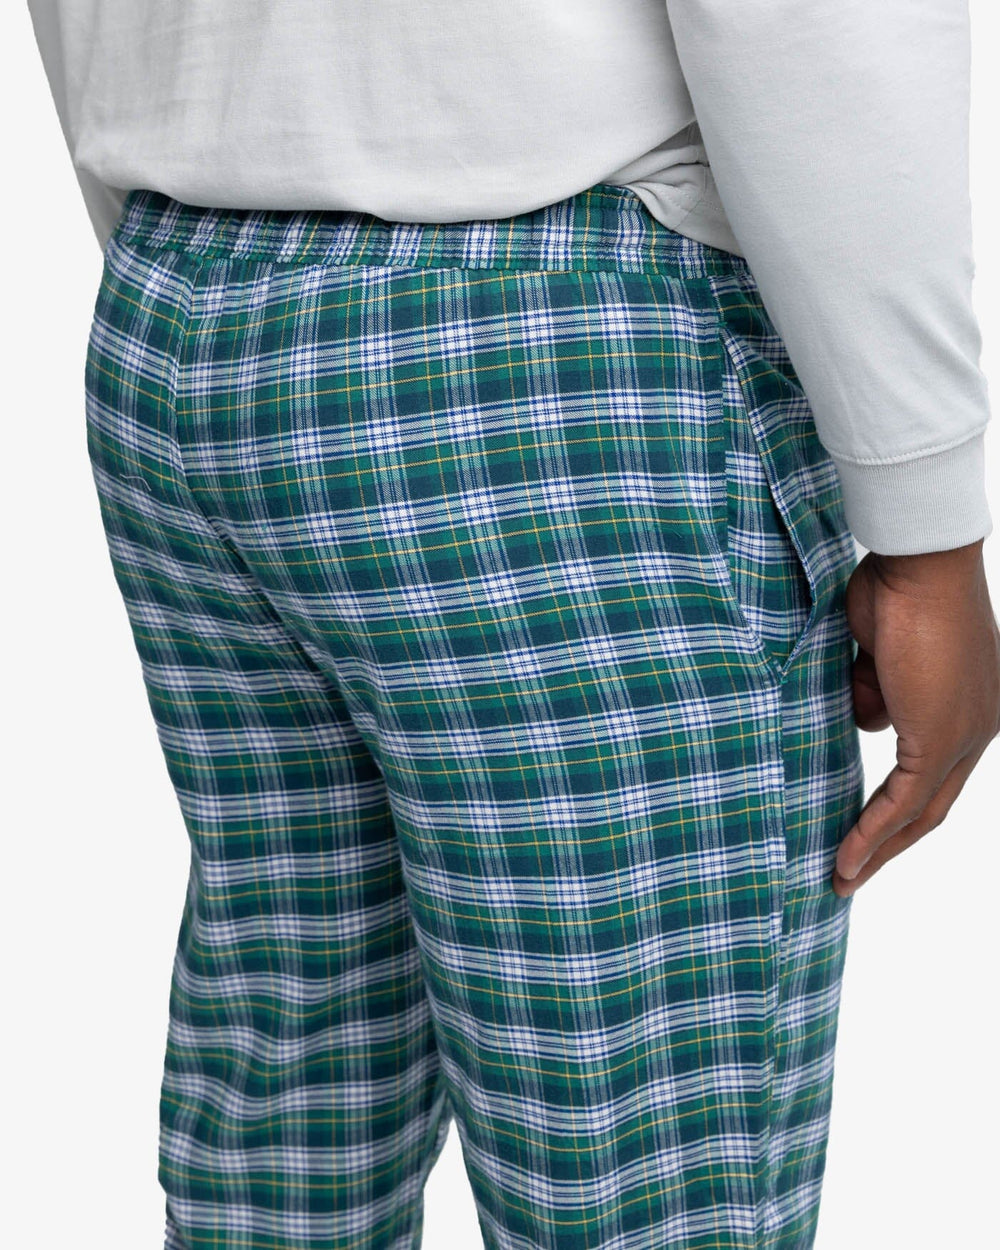 The detail view of the Southern Tide Highmark Plaid Lounge Pant by Southern Tide - Georgian Bay Green